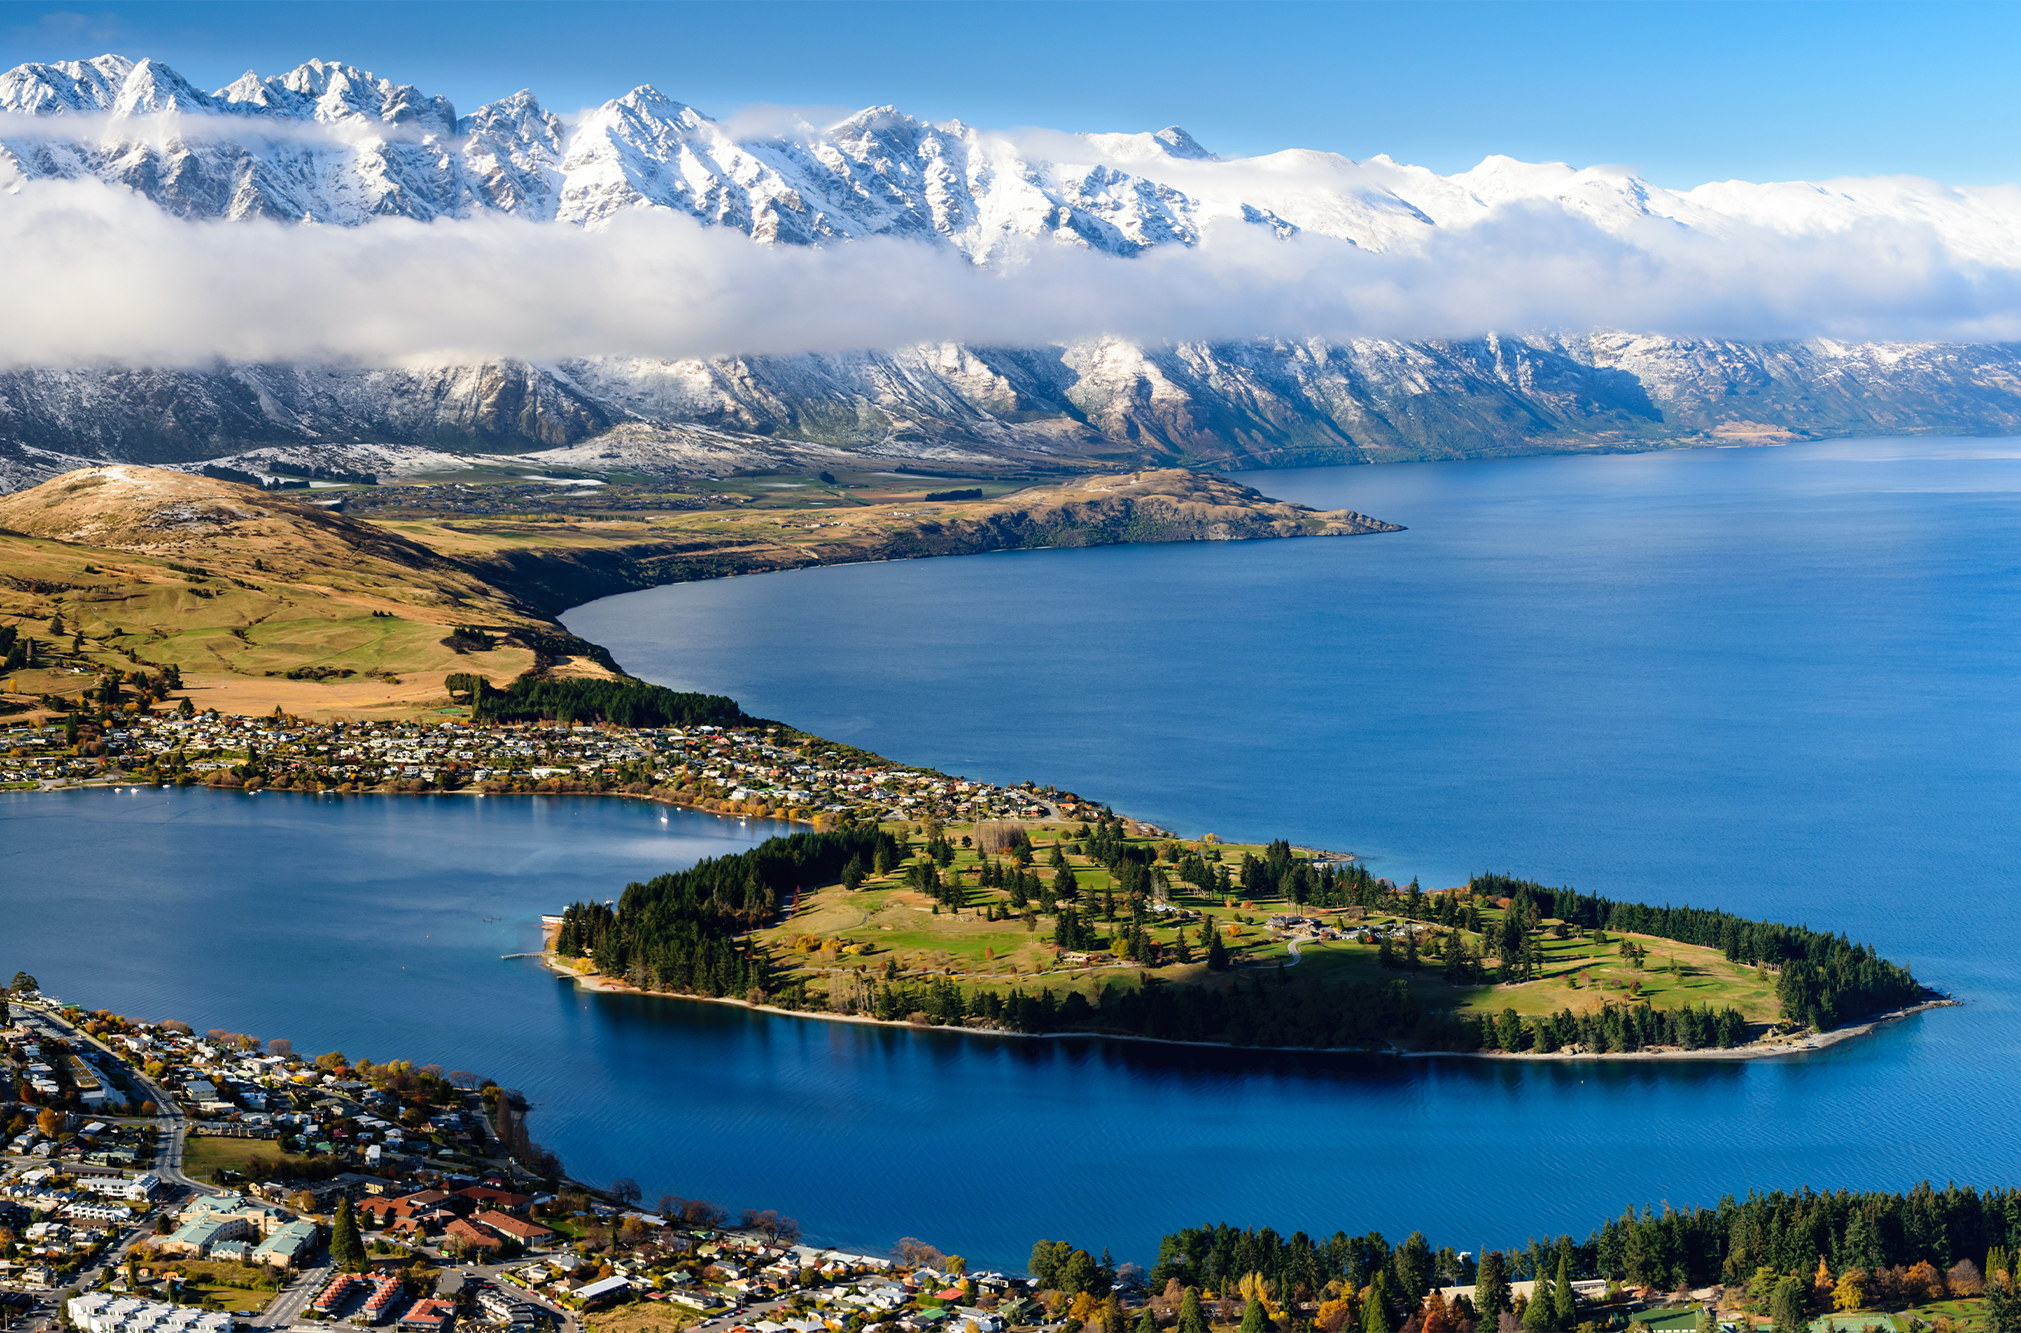 Aerial view of Queenstown showing land use and urban development.